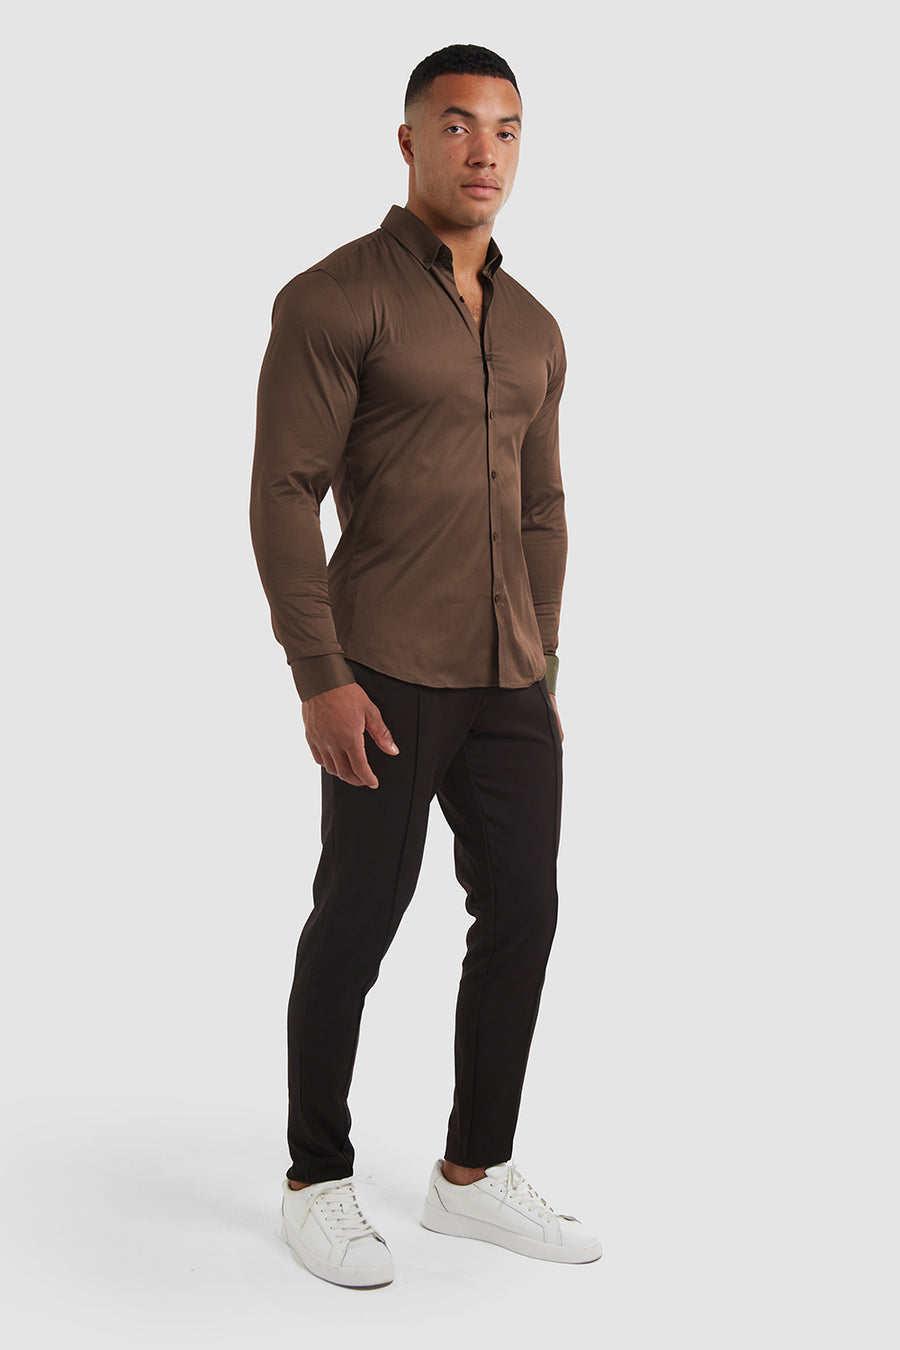 Athletic Fit Signature Shirt in Chocolate - TAILORED ATHLETE - USA